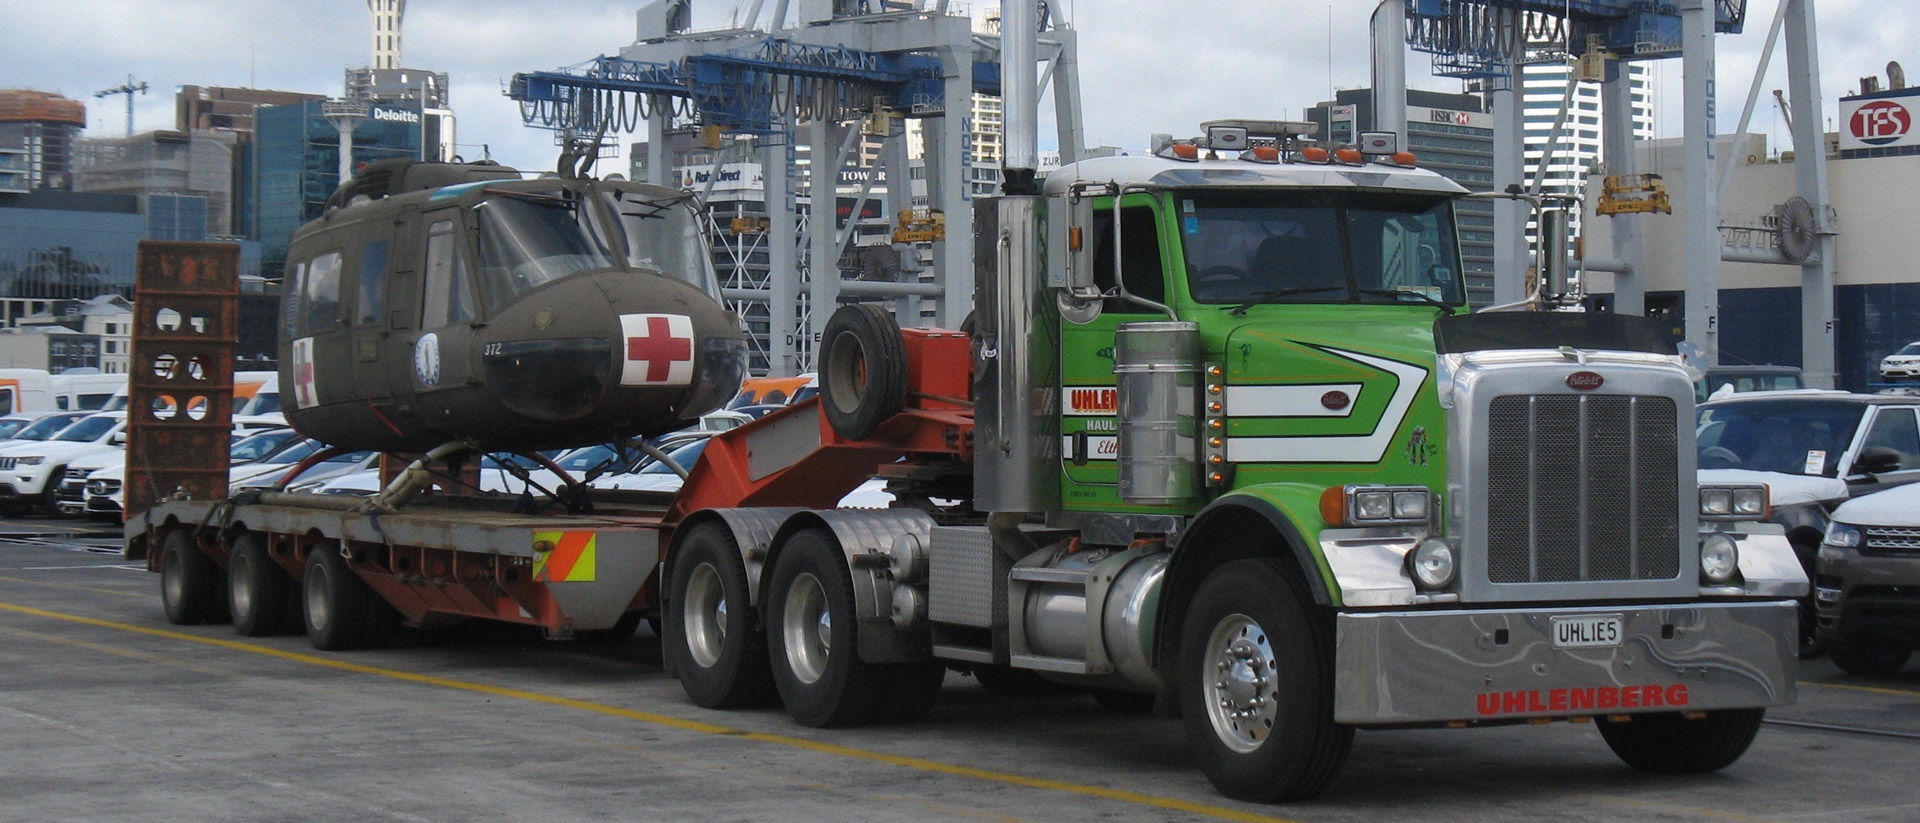 A variety of trucks ensures the ability to move just about anything